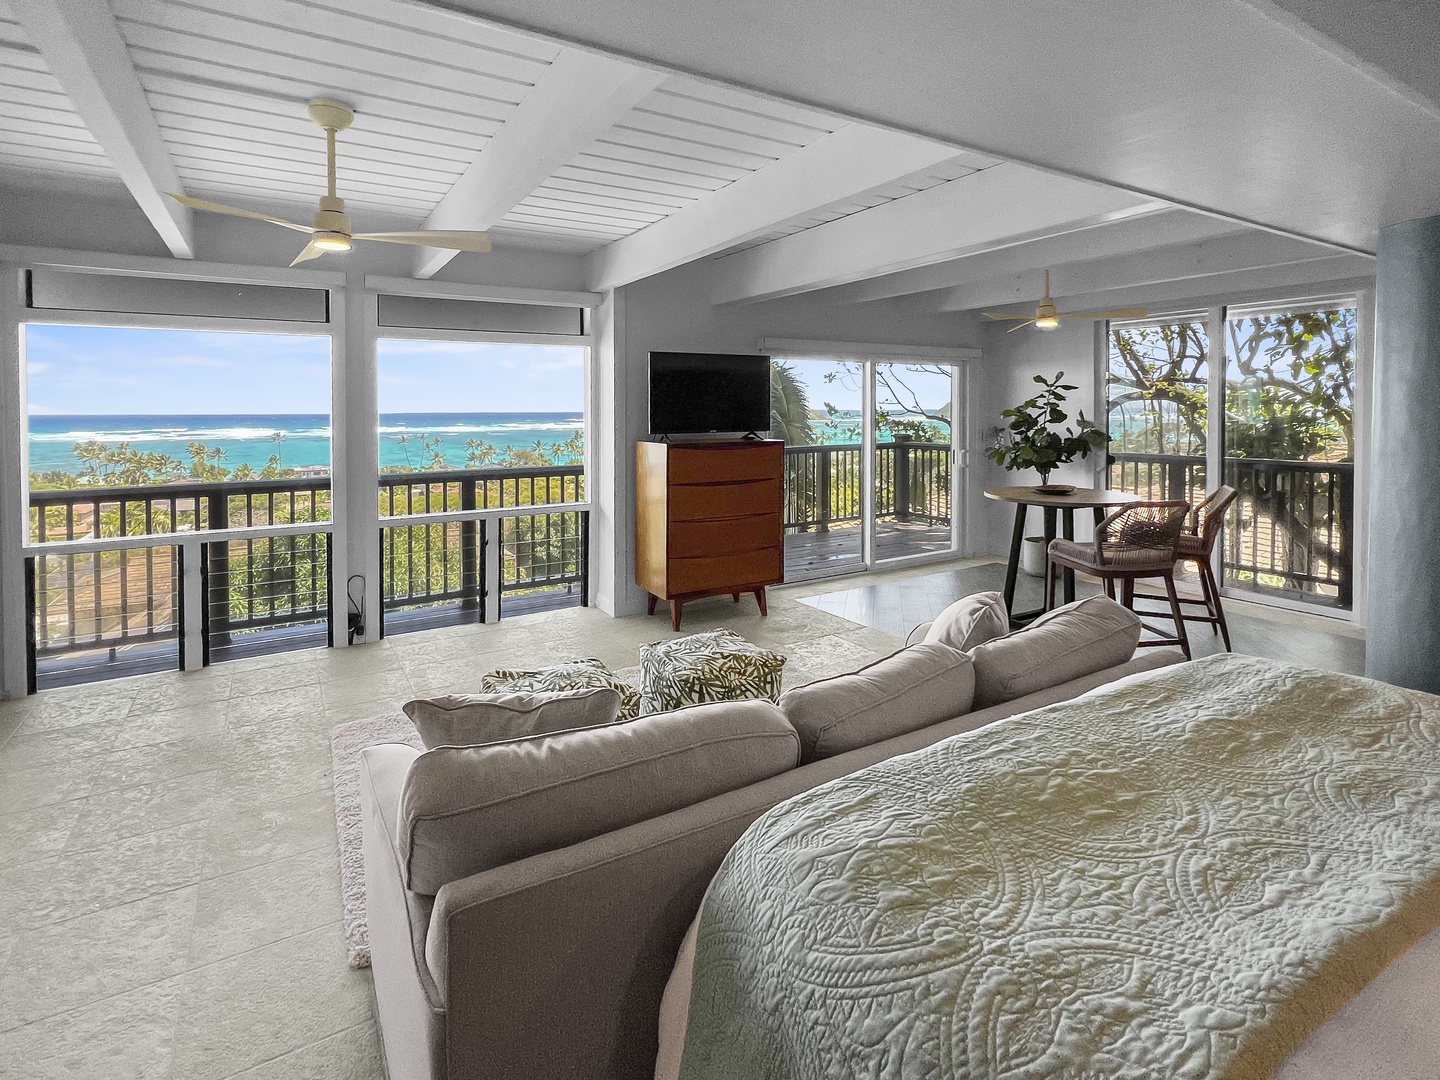 Kailua Vacation Rentals, Hale Lani - Guest bedroom has a flat screen TV, sweeping ocean views, and a private seating area